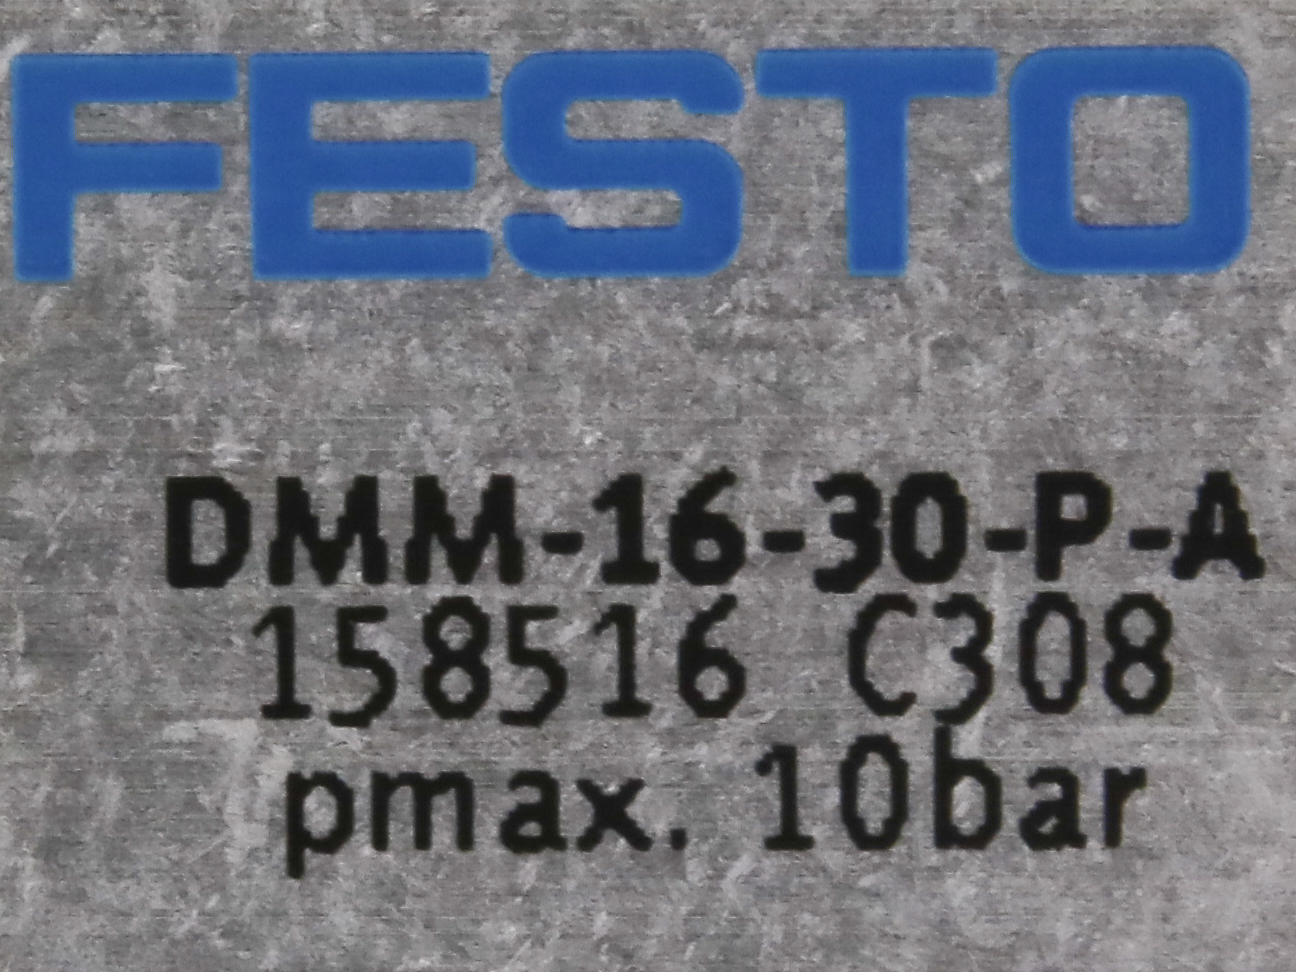 Festo FESTO 158519 Cylindre Compact Dmm 16 30 P A S20 DMM-16-30-P-A-S20 